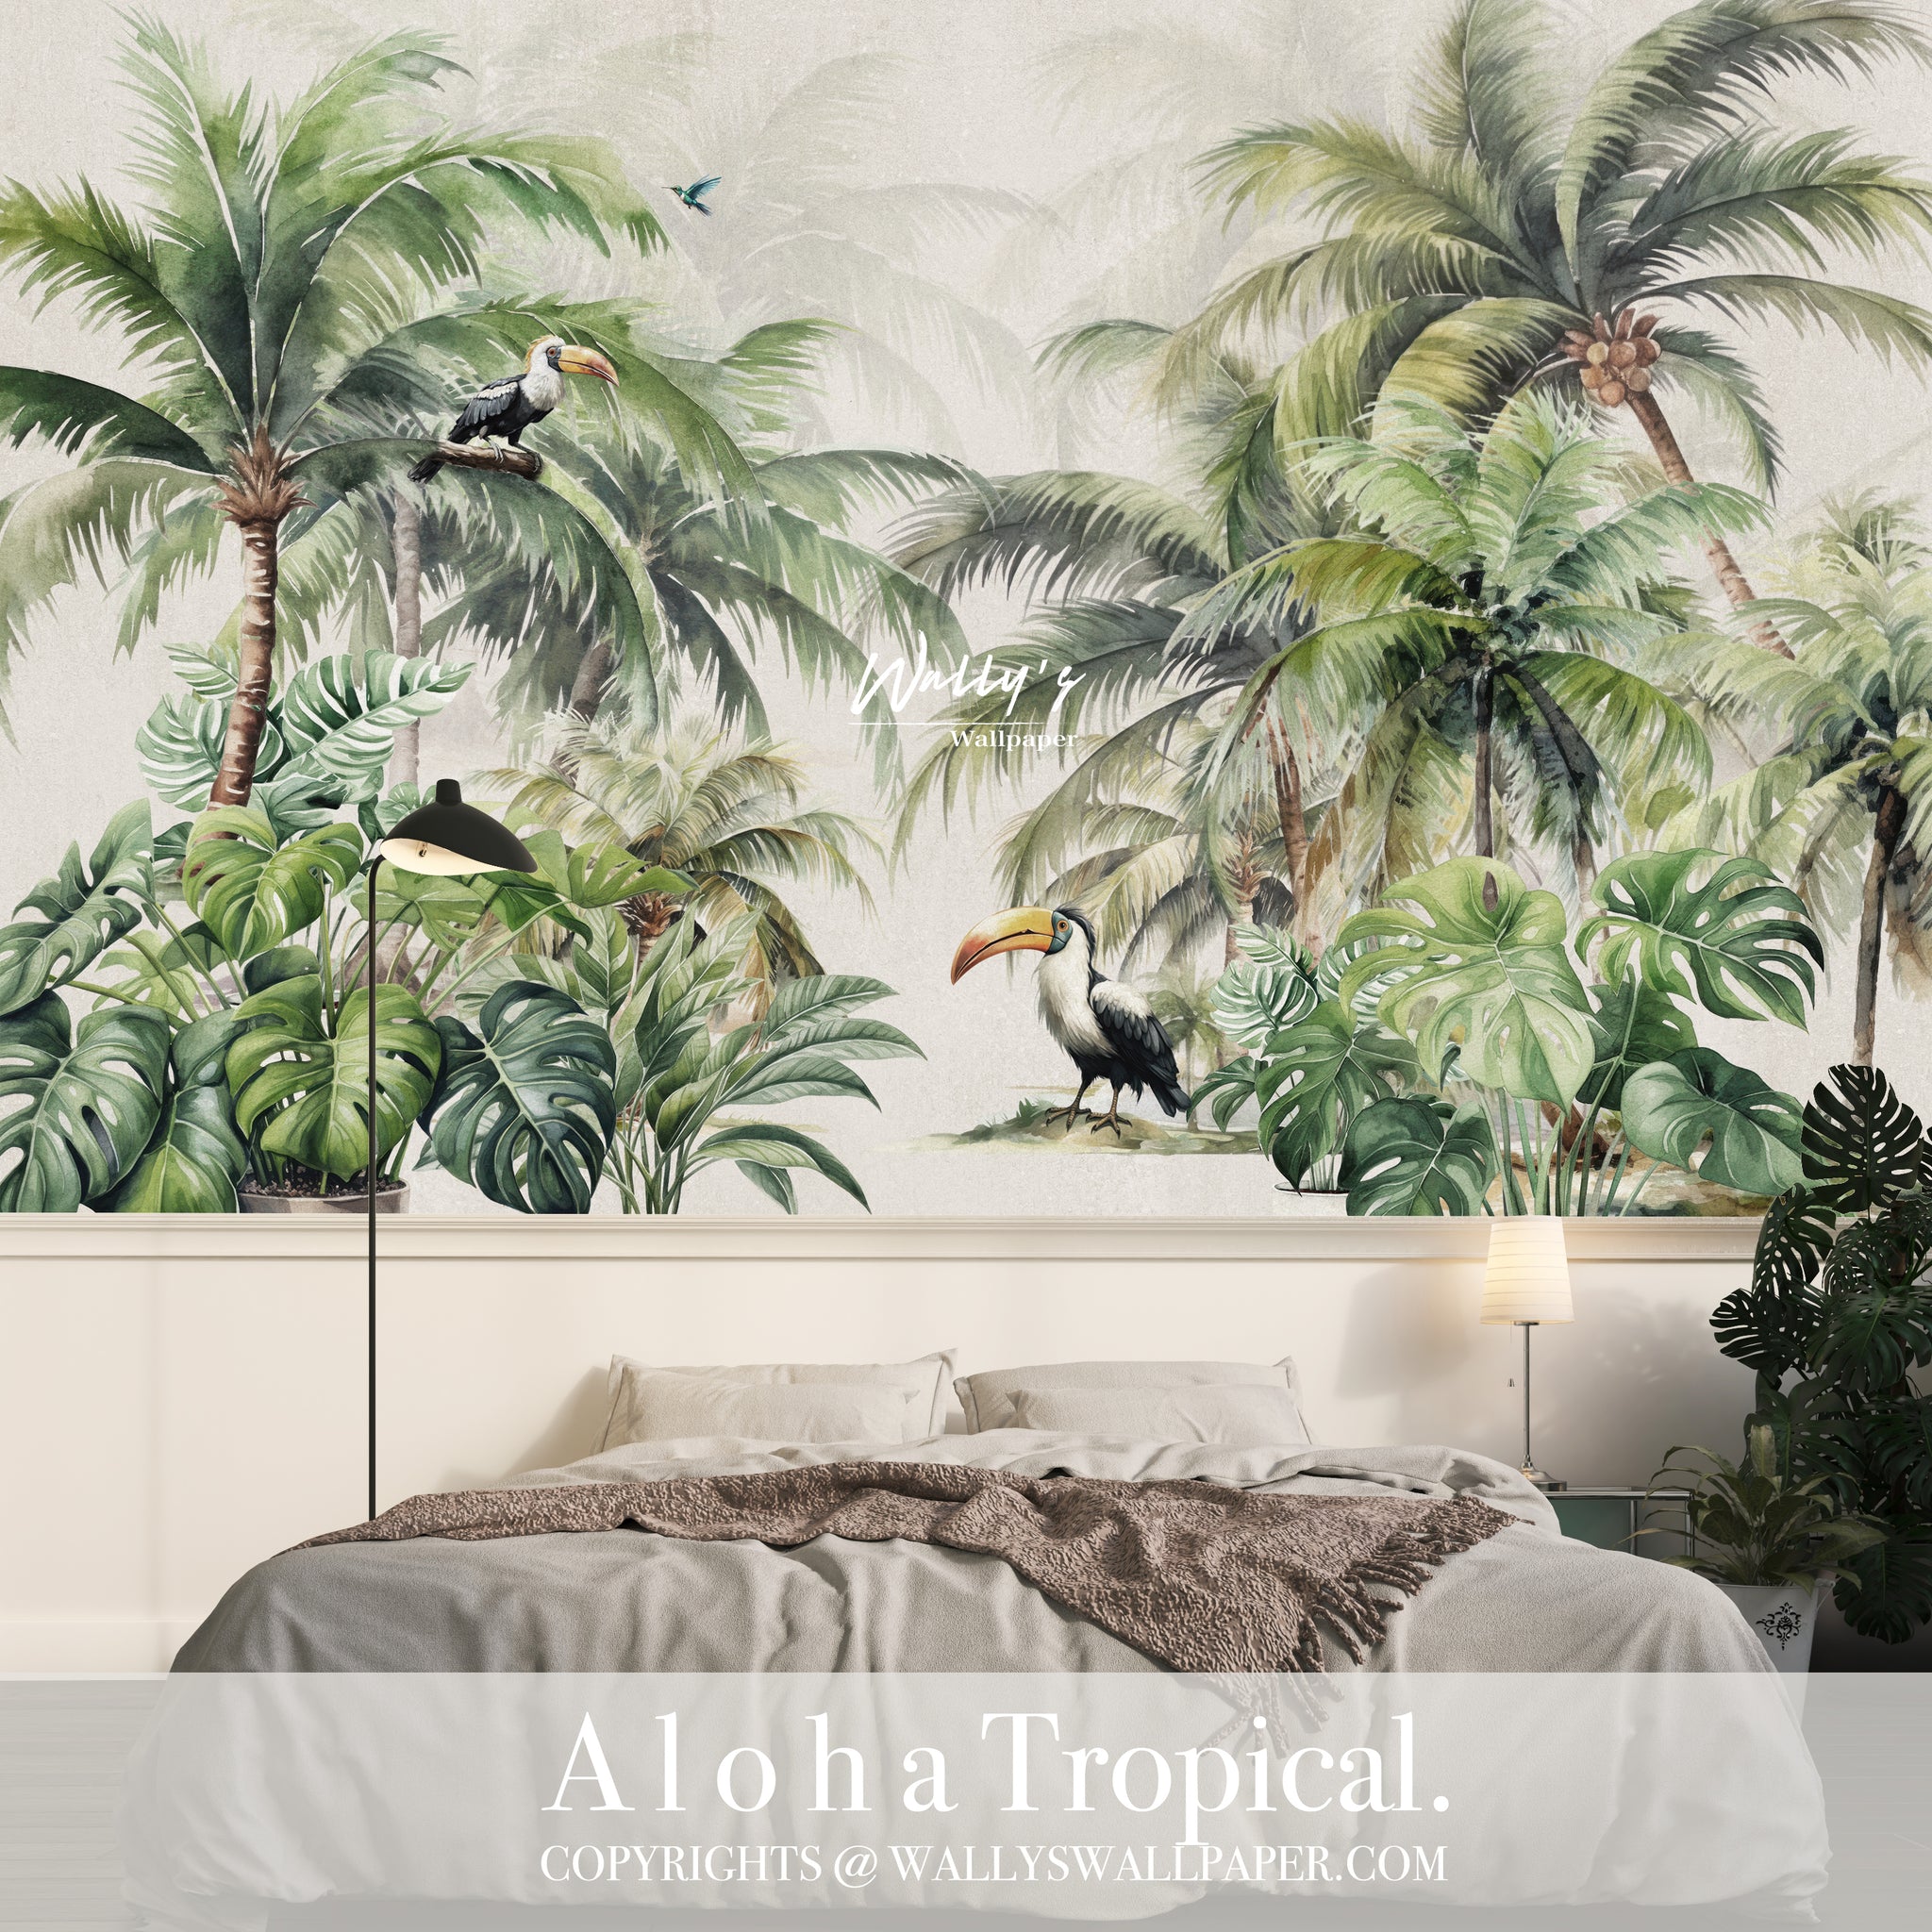 Tropical Garden wallpaper tropical tree and mascot bird best wallpaper in Egypt and Middle East , Modern wallpaper, tropical wallpaper, Custom wall covering,plam trees wallpaper, wallpaper best quality in Egypt  